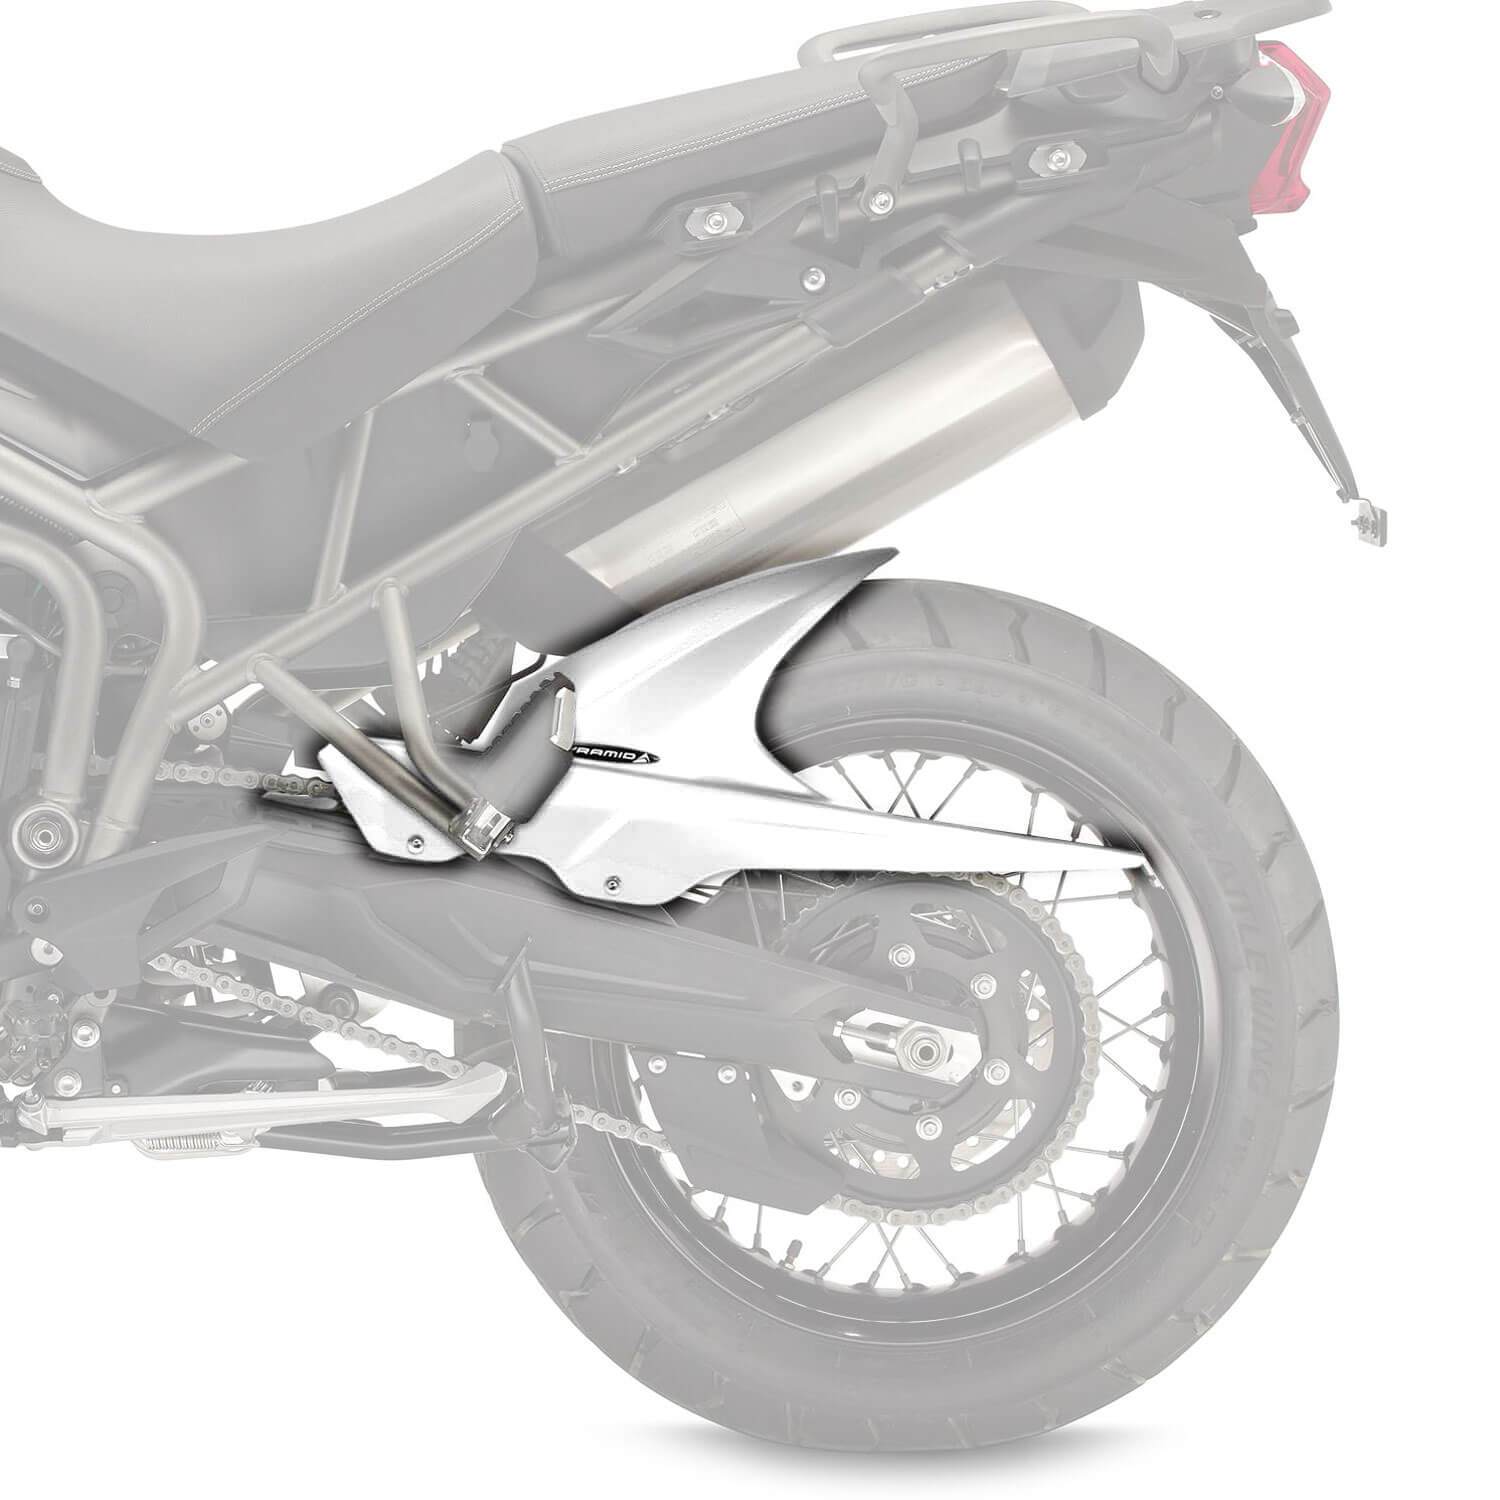 Pyramid Hugger | Gloss White | Triumph Tiger 800 XC/XCX/XCA/Low 2011>Current-076800C-Huggers-Pyramid Motorcycle Accessories